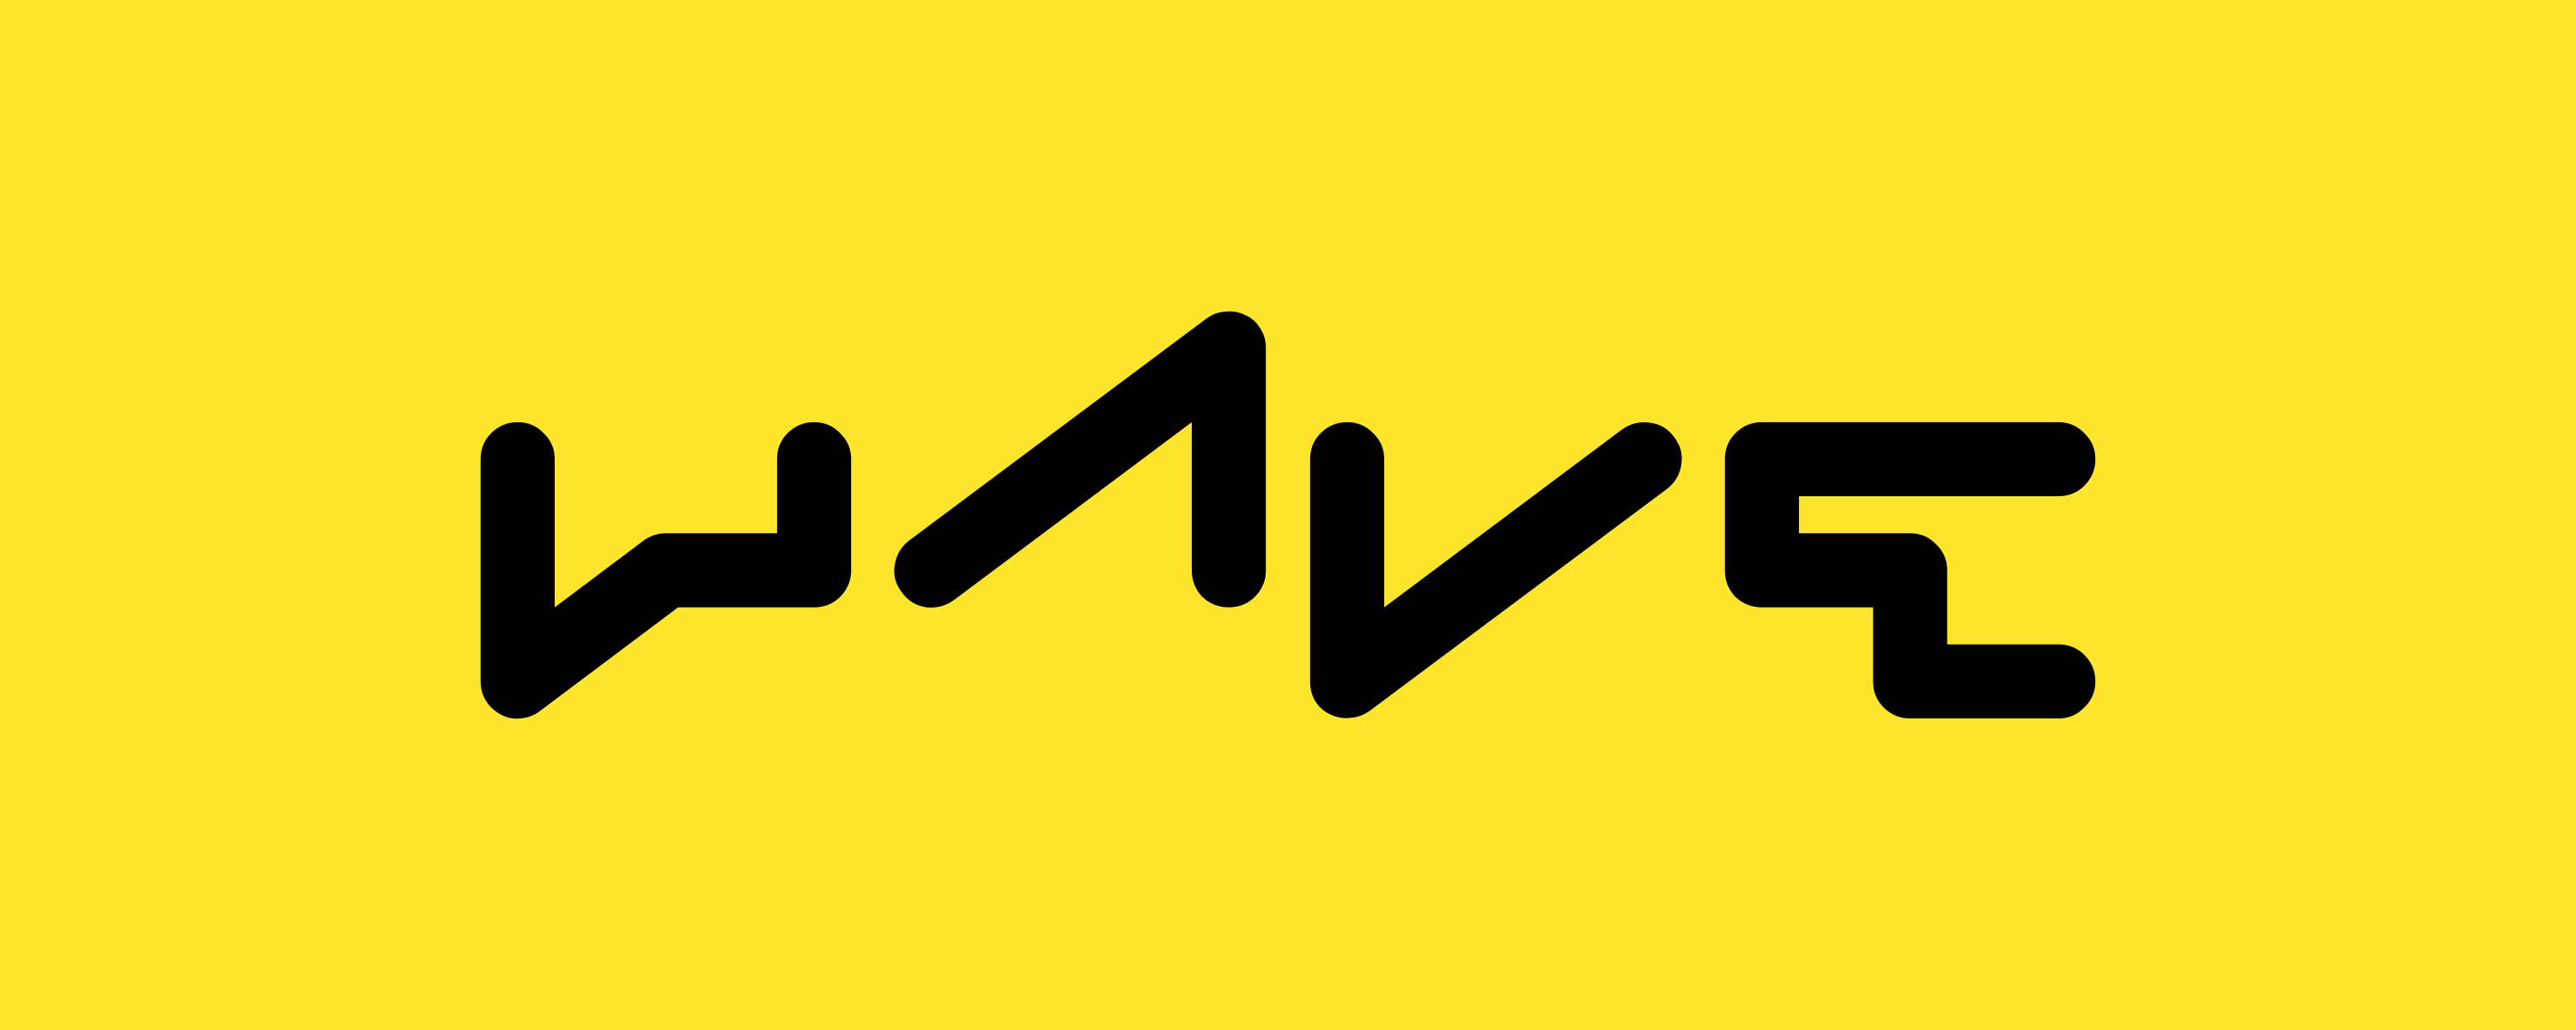 wave-type-yellow.png